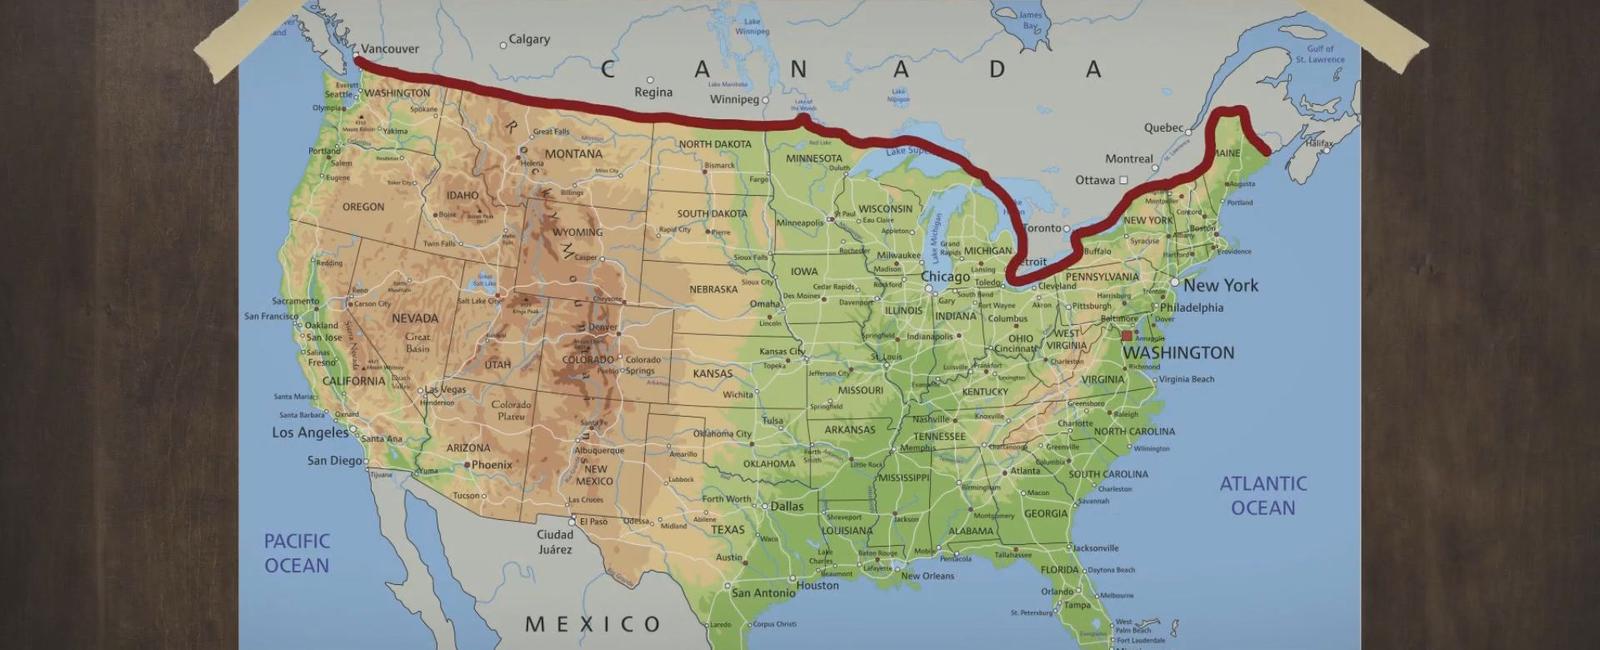 Which two countries share the longest international border canada and the usa